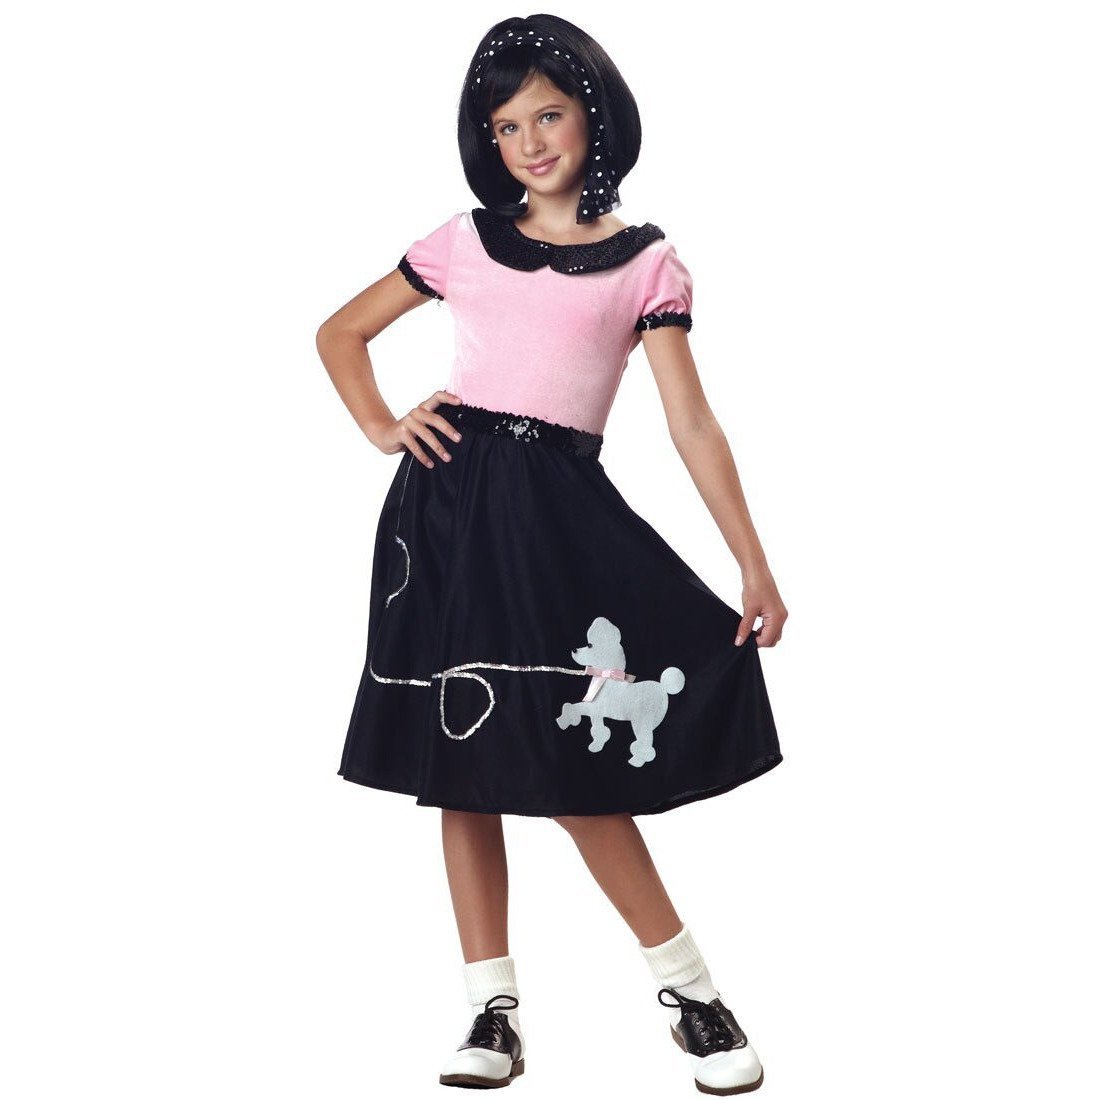 50s hop wpoodle skirt outfit girls